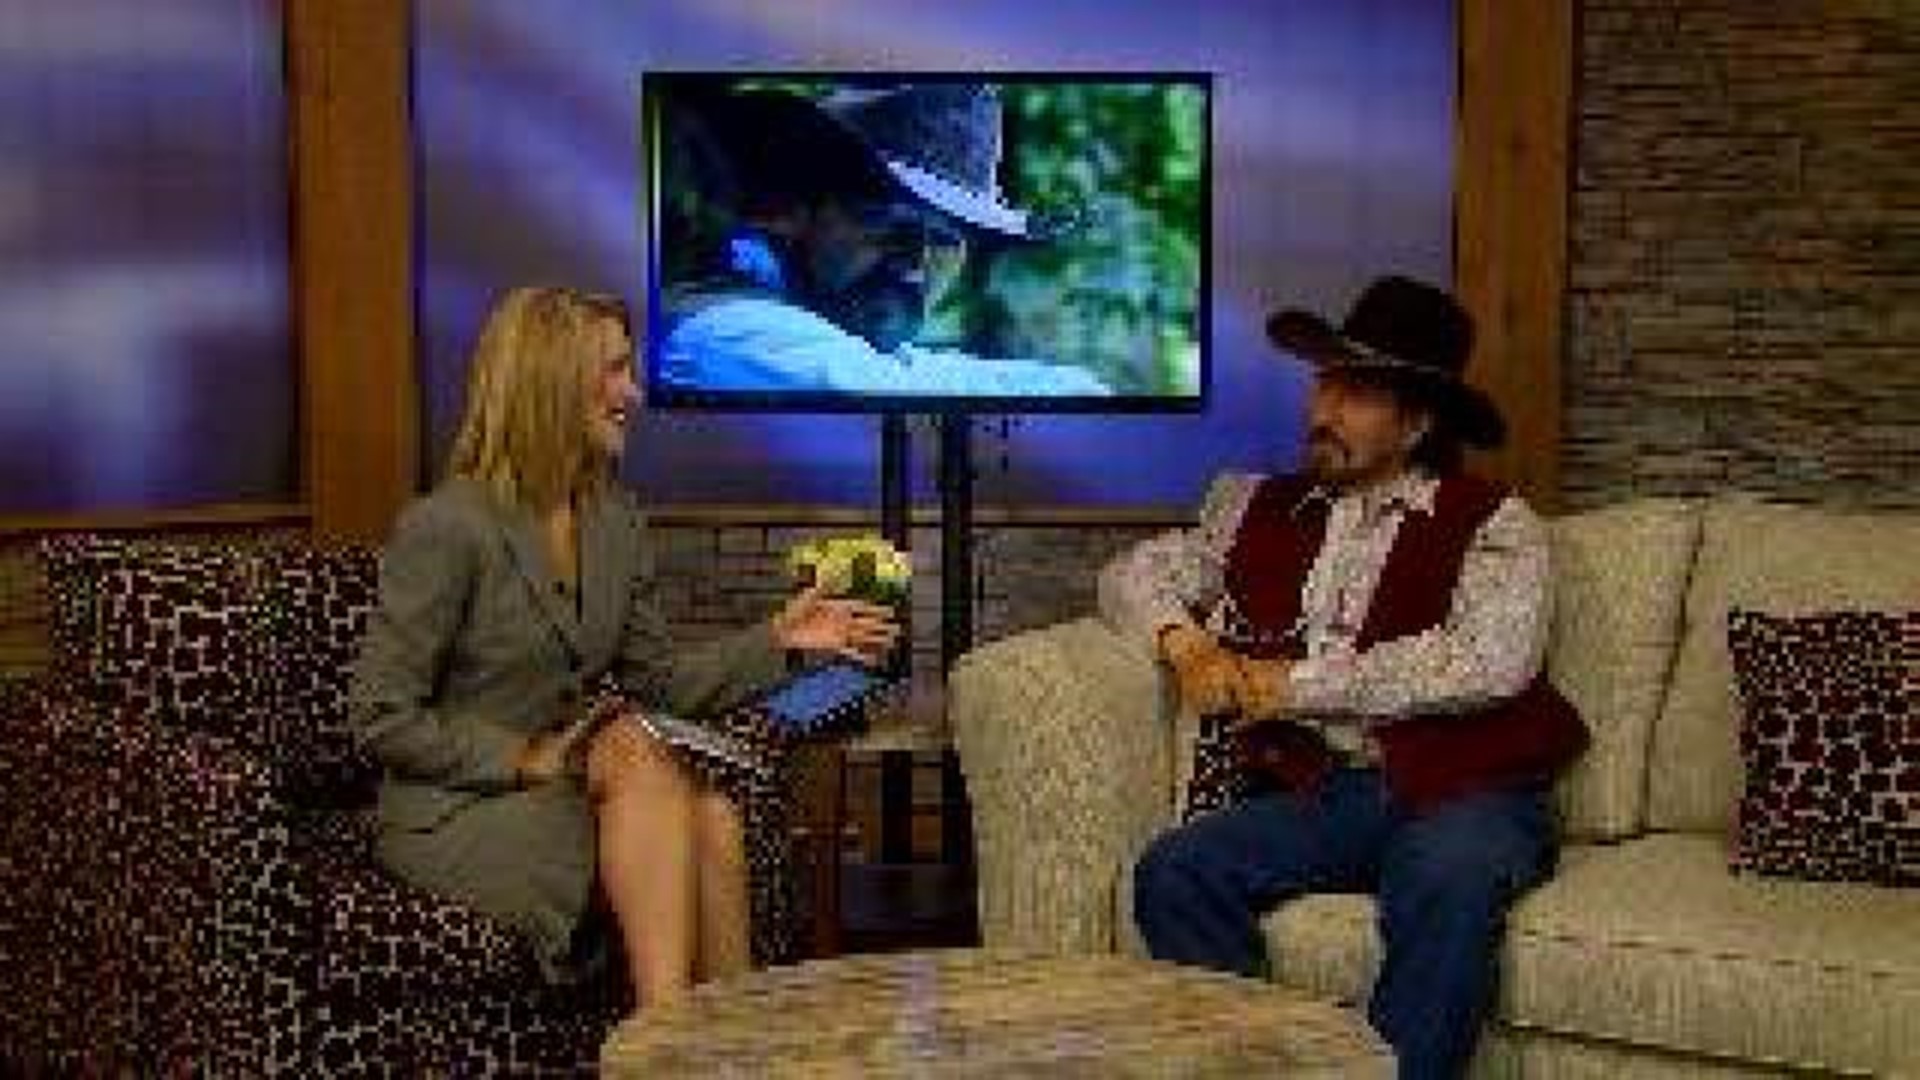 5NEWS Weekend: Music on the Mountain